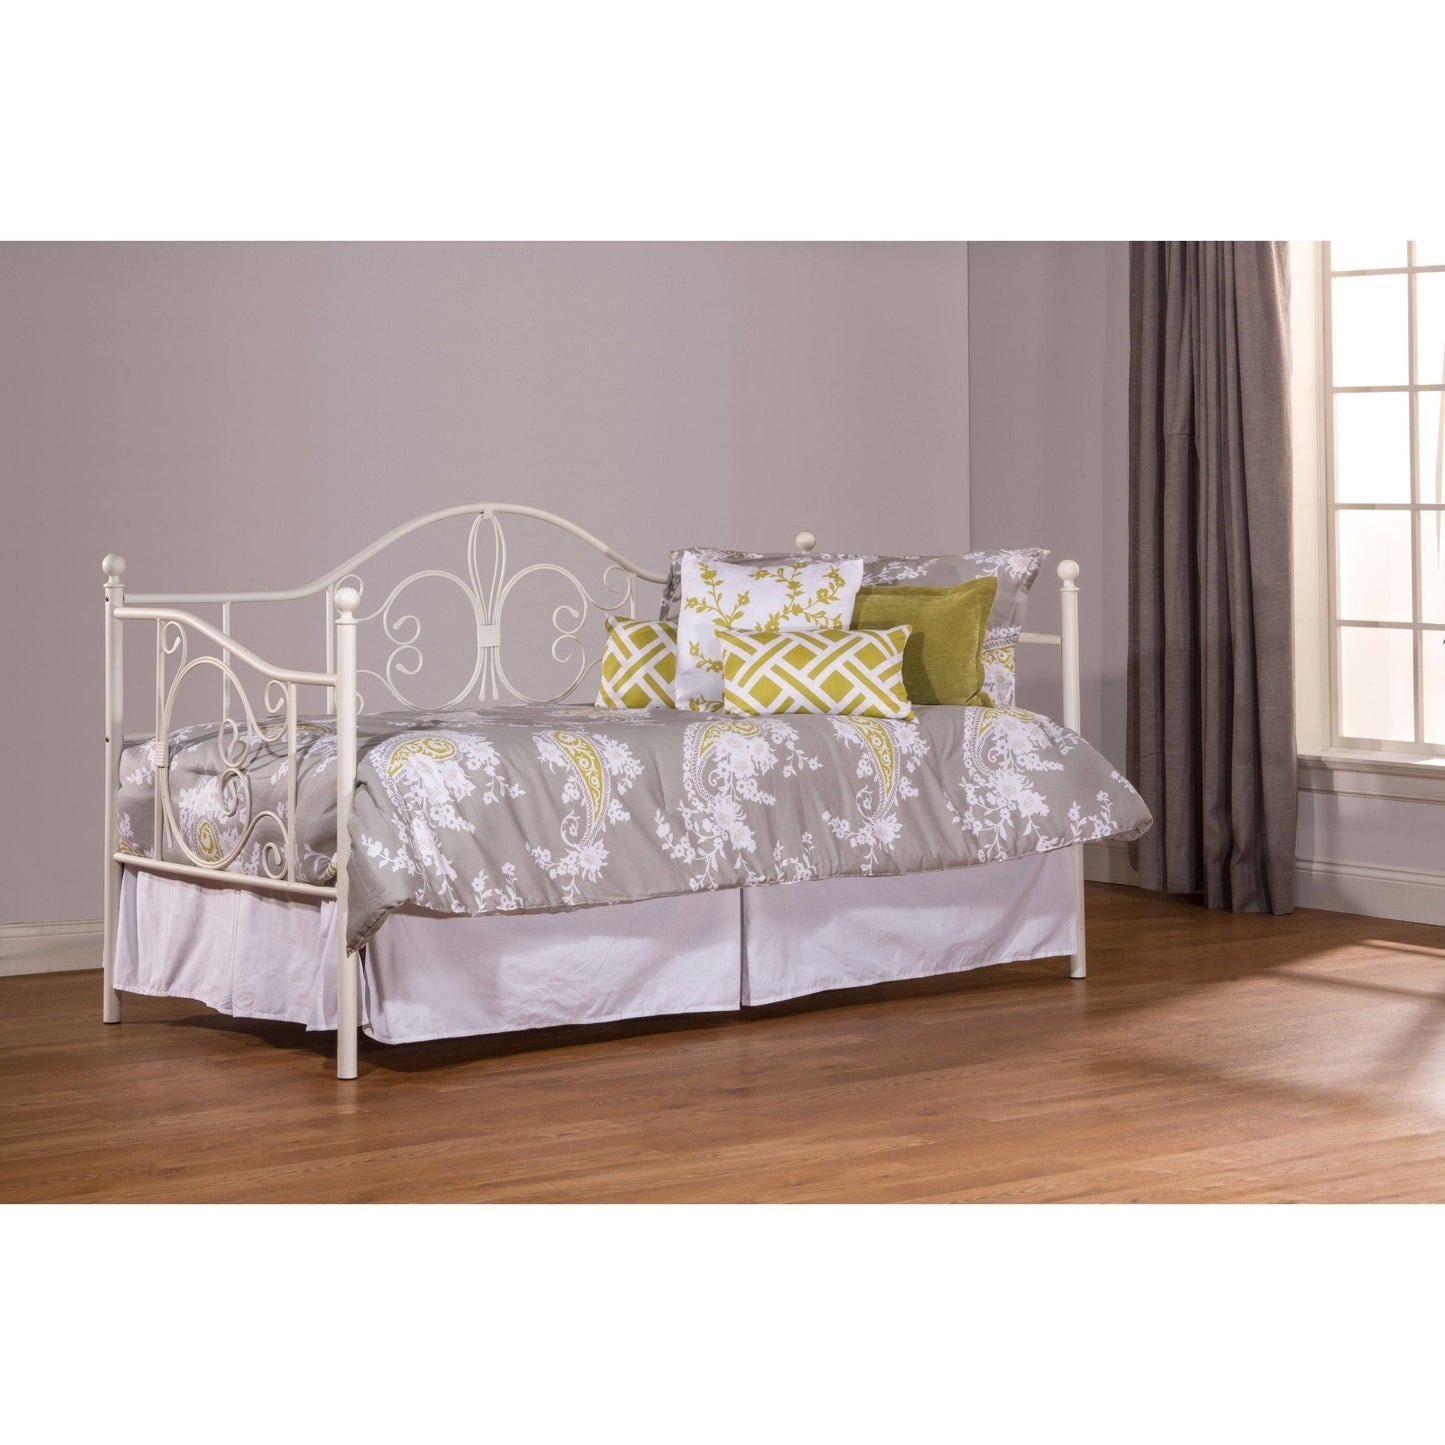 Furniture Ruby Daybed With Suspension Deck And Roll Out Trundle Unit, Textured White